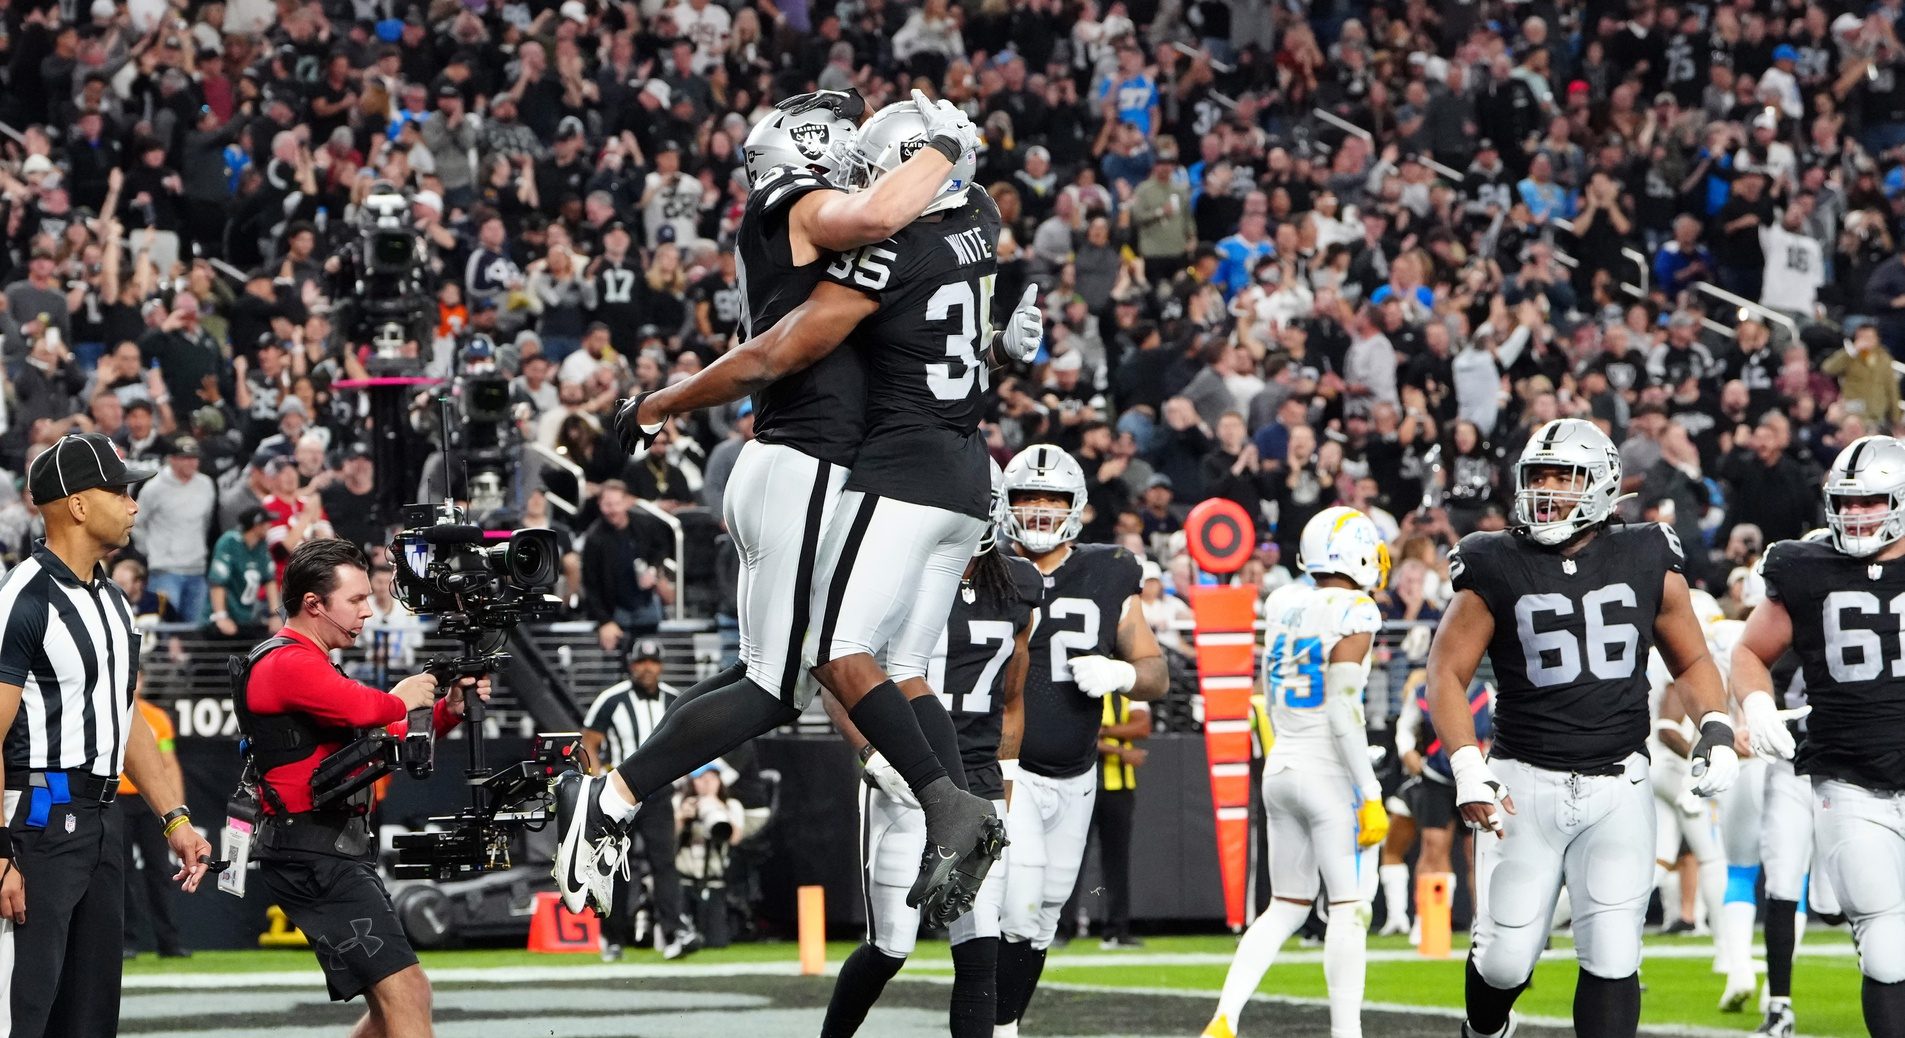 Las Vegas Raiders tight end Michael Mayer (87) celebrates after scoring a touchdown with running back Zamir White (35) in the second quarter against the Los Angeles Chargers at Allegiant Stadium.